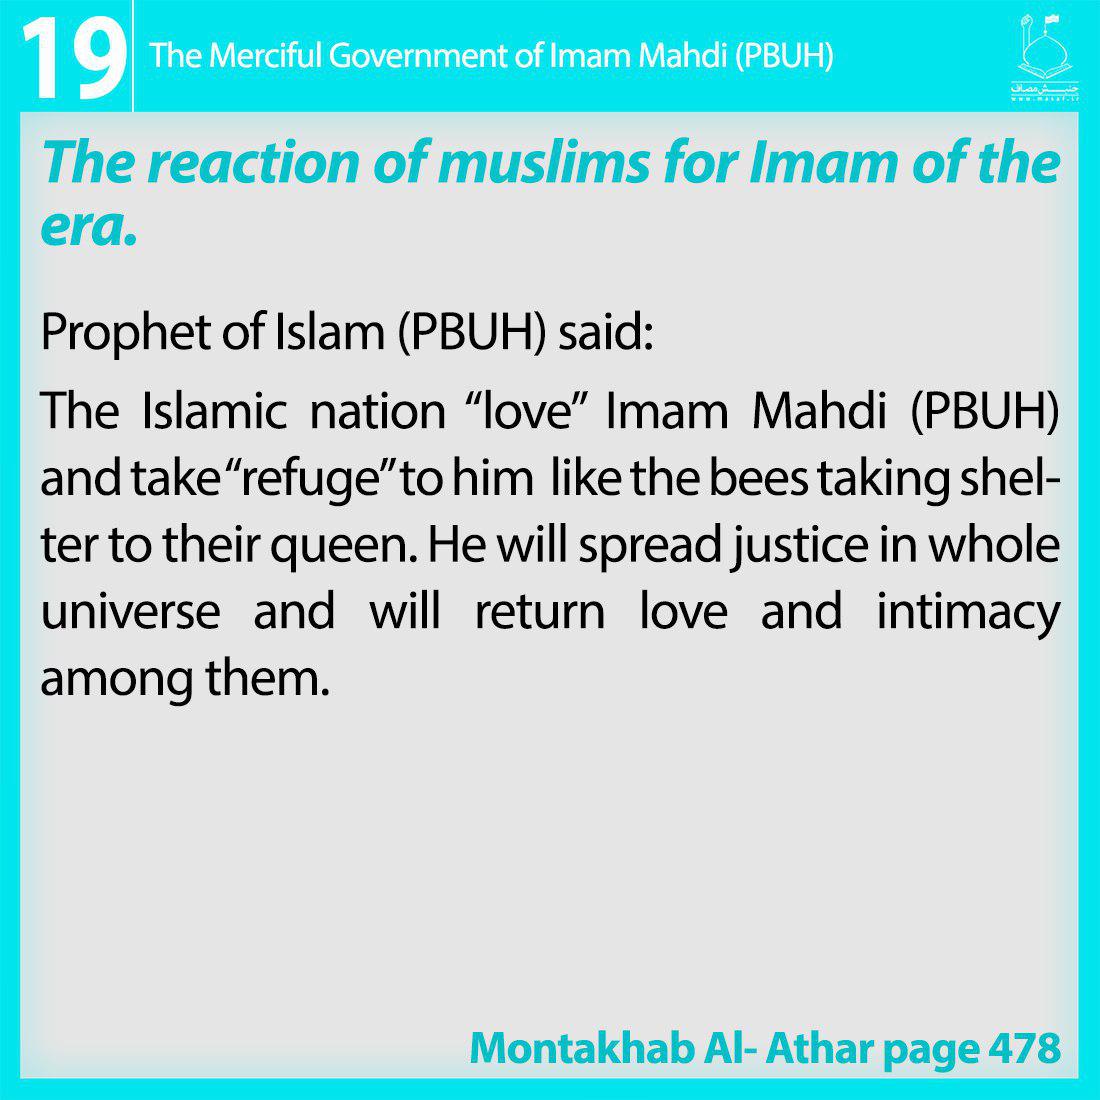 12th imam , 12th imam prophecy  . imam mahdi  ,  who is 12th imam , hidden imam,12th imam birth,where is 12th imam,12th imam and jesus